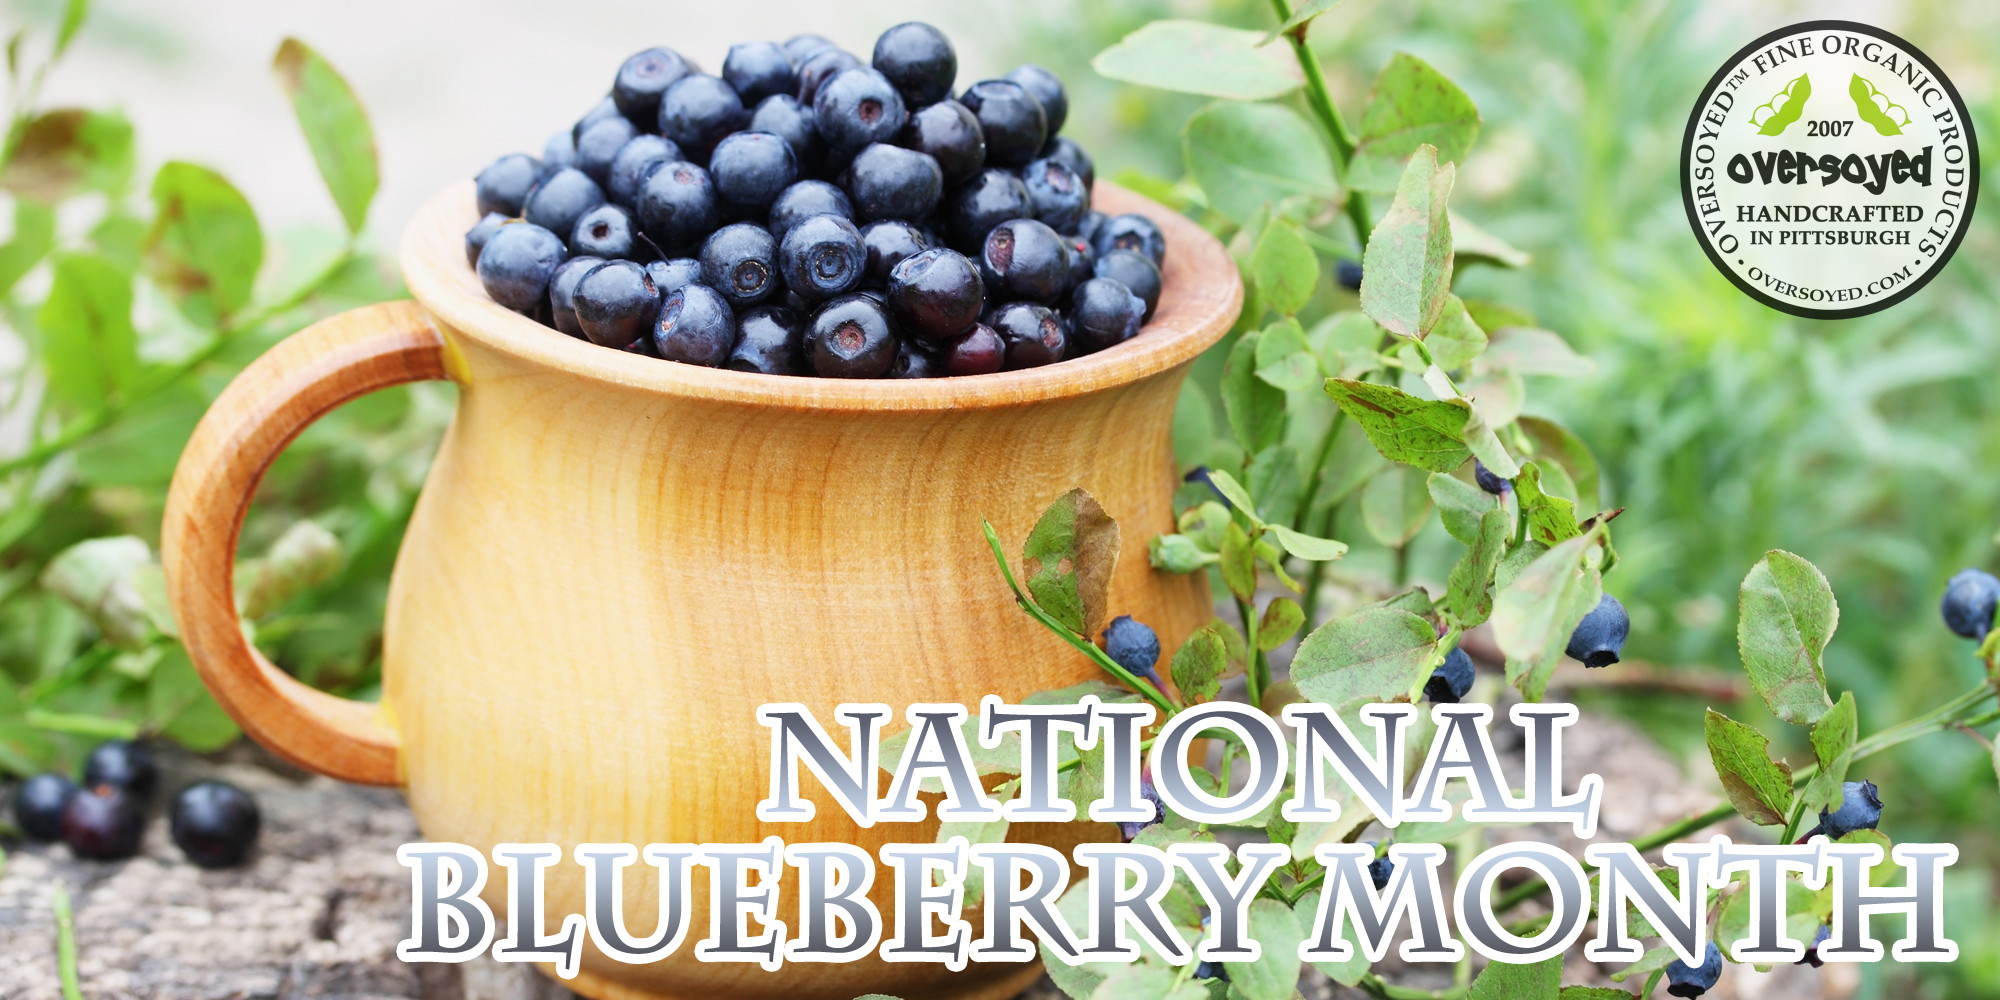 OverSoyed Fine Organic Products - National Blueberry Month